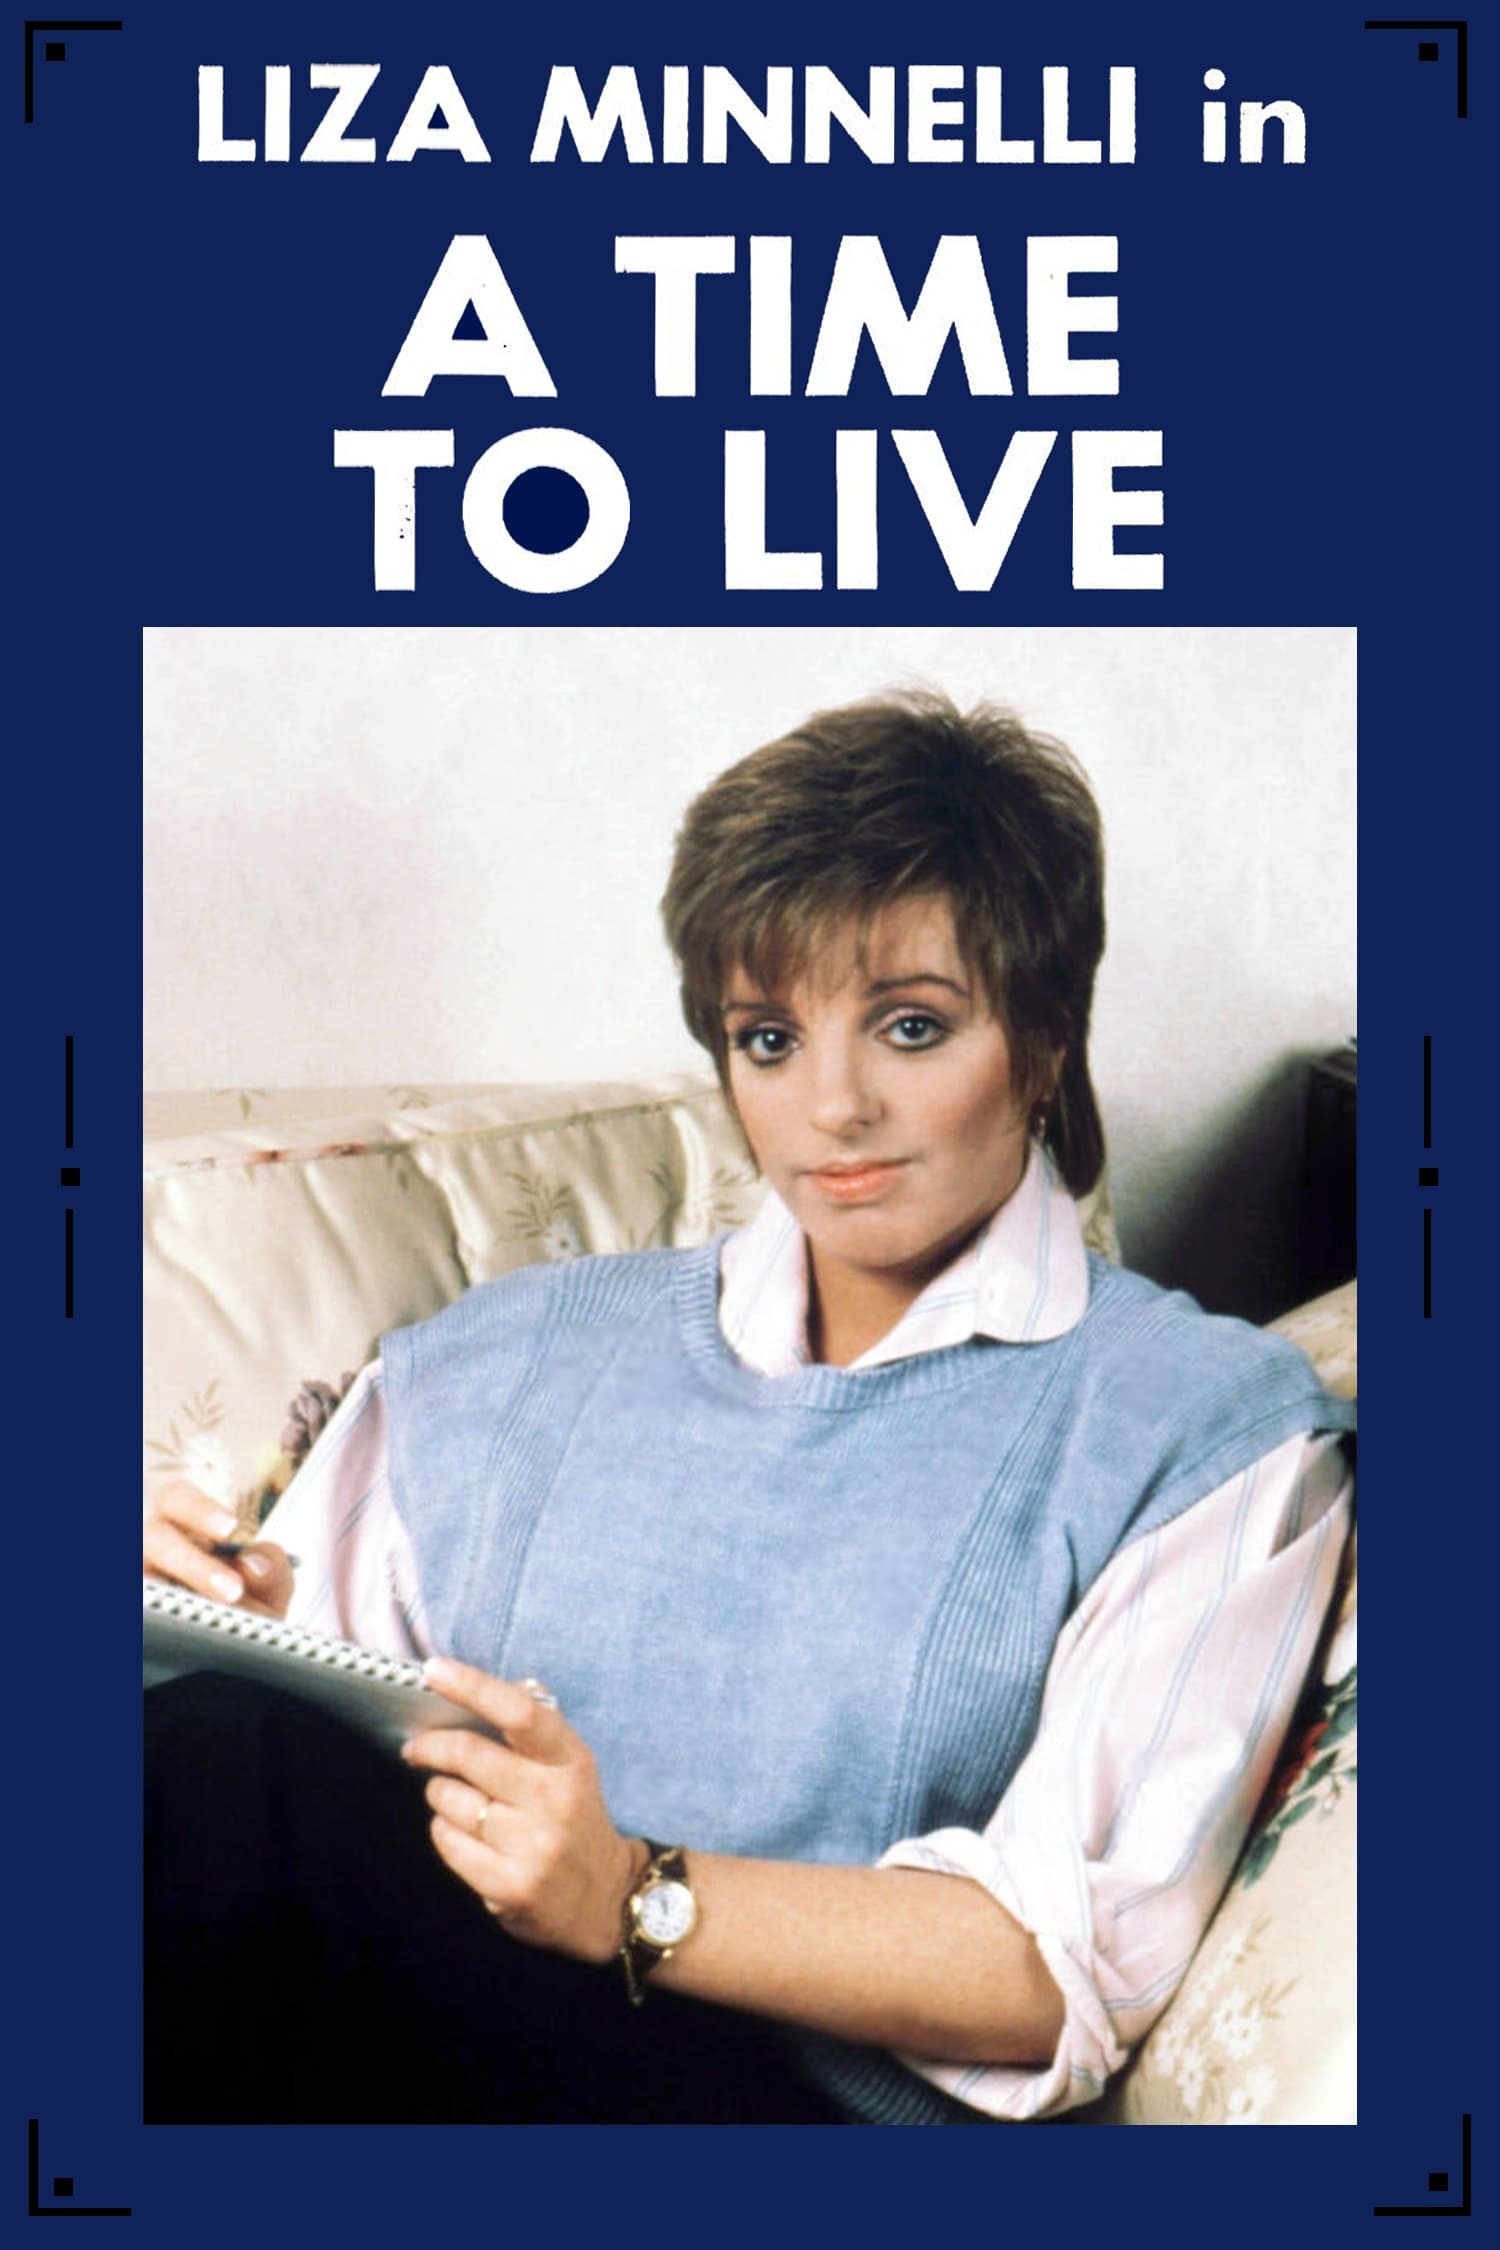 A Time to Live (1985)